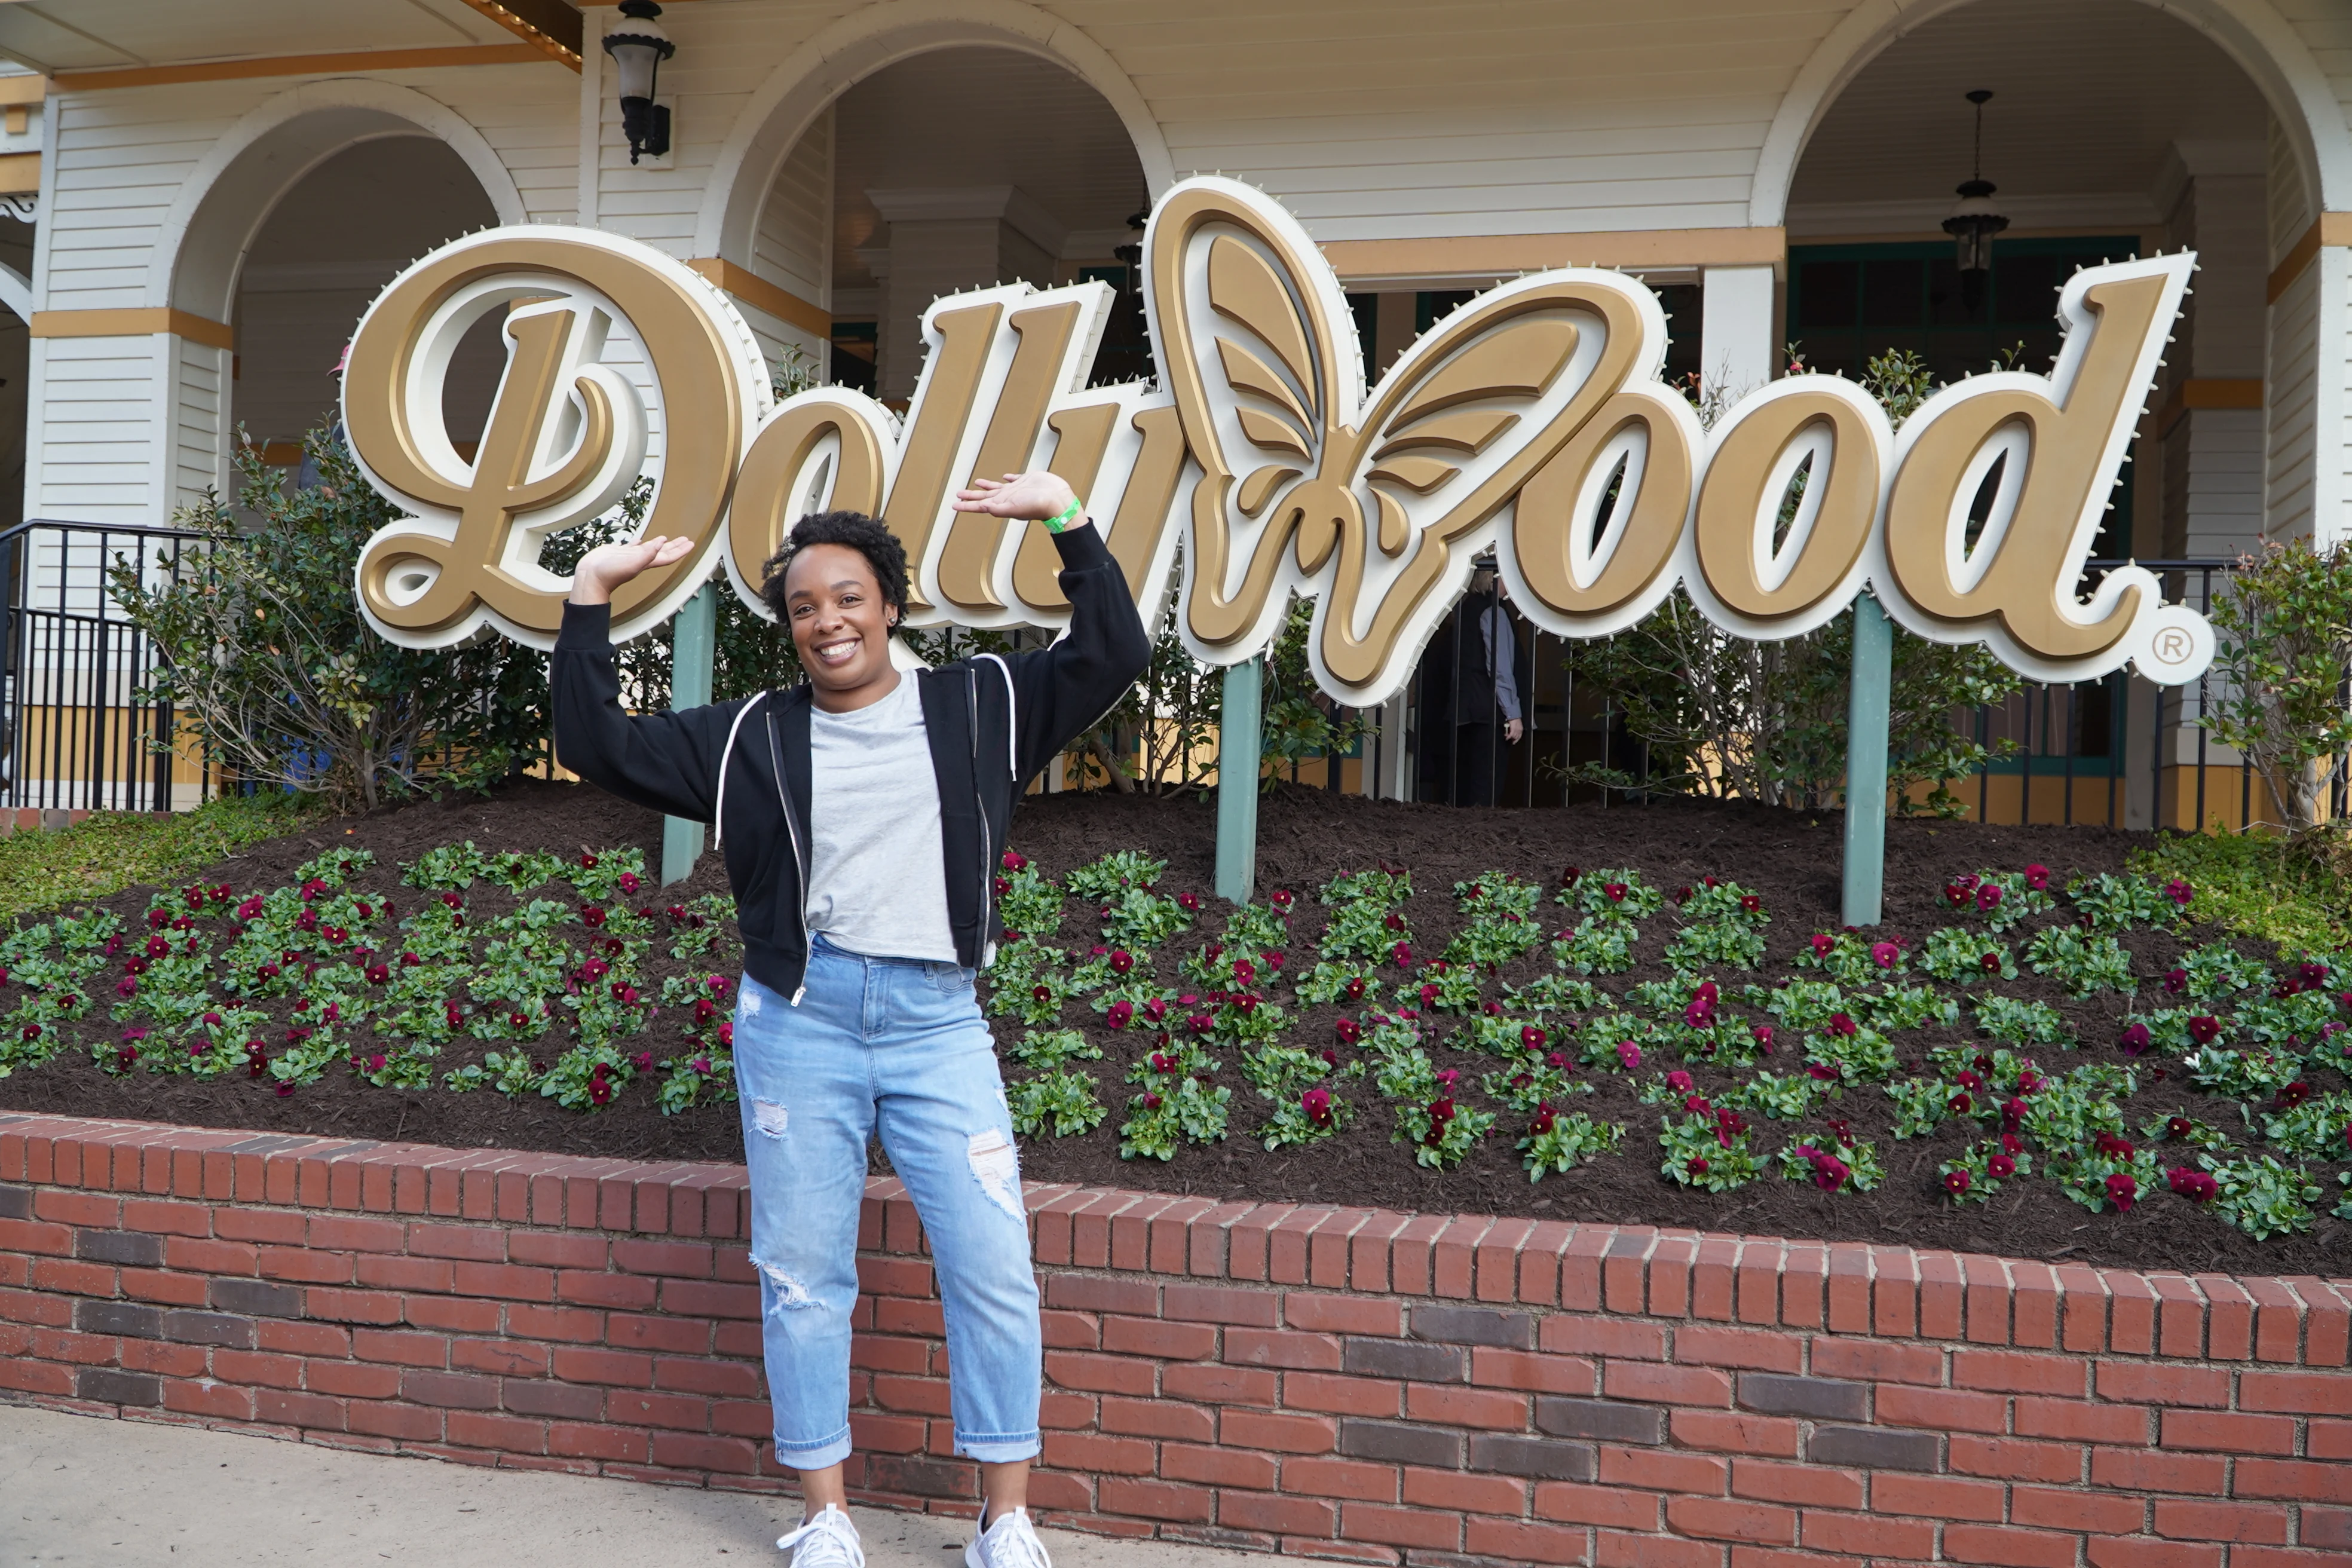 Dollywood is Ranked the #1 Theme Park in the US with Tripadvisor